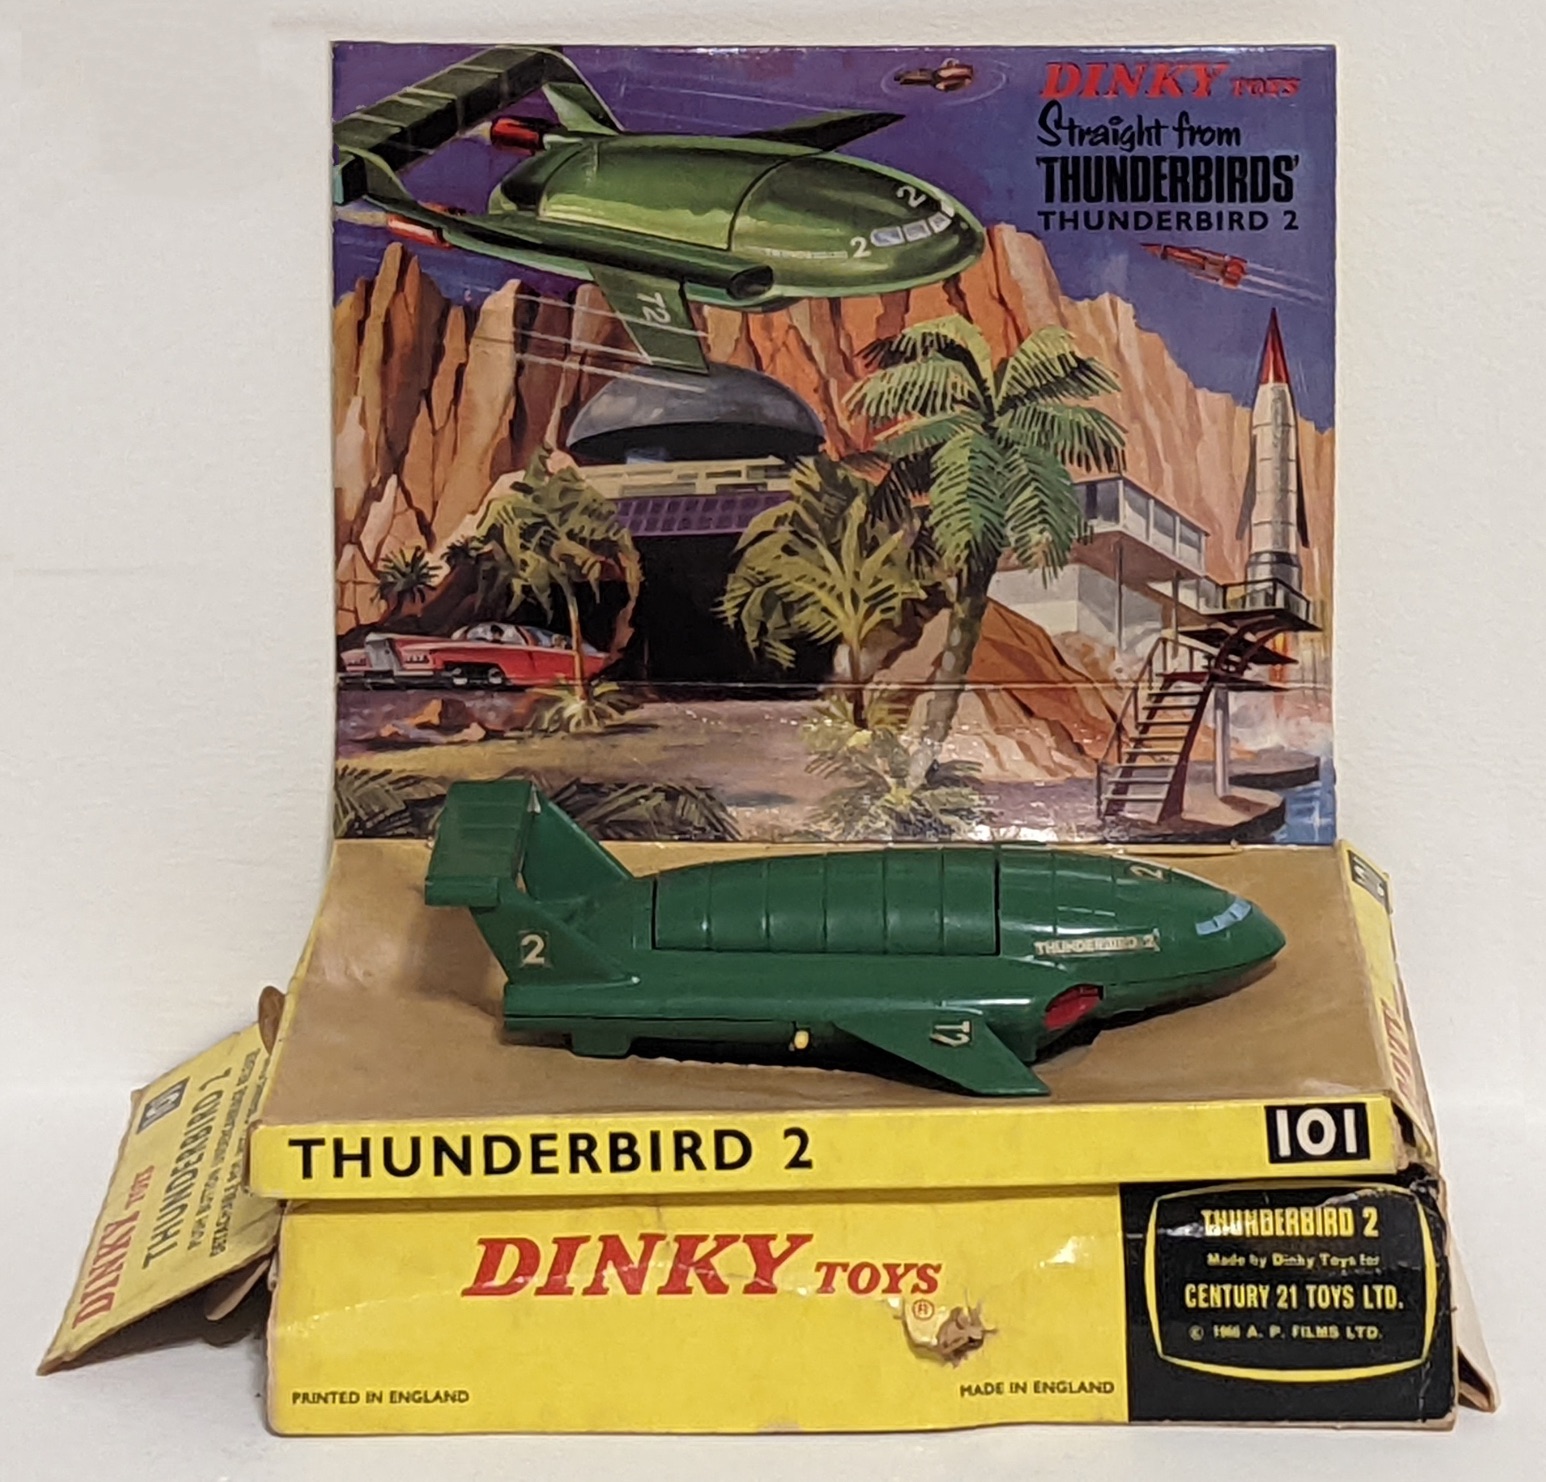 Dinky Toys No.101 Thunderbird 2, comprising of green body with four yellow plastic legs and red rear